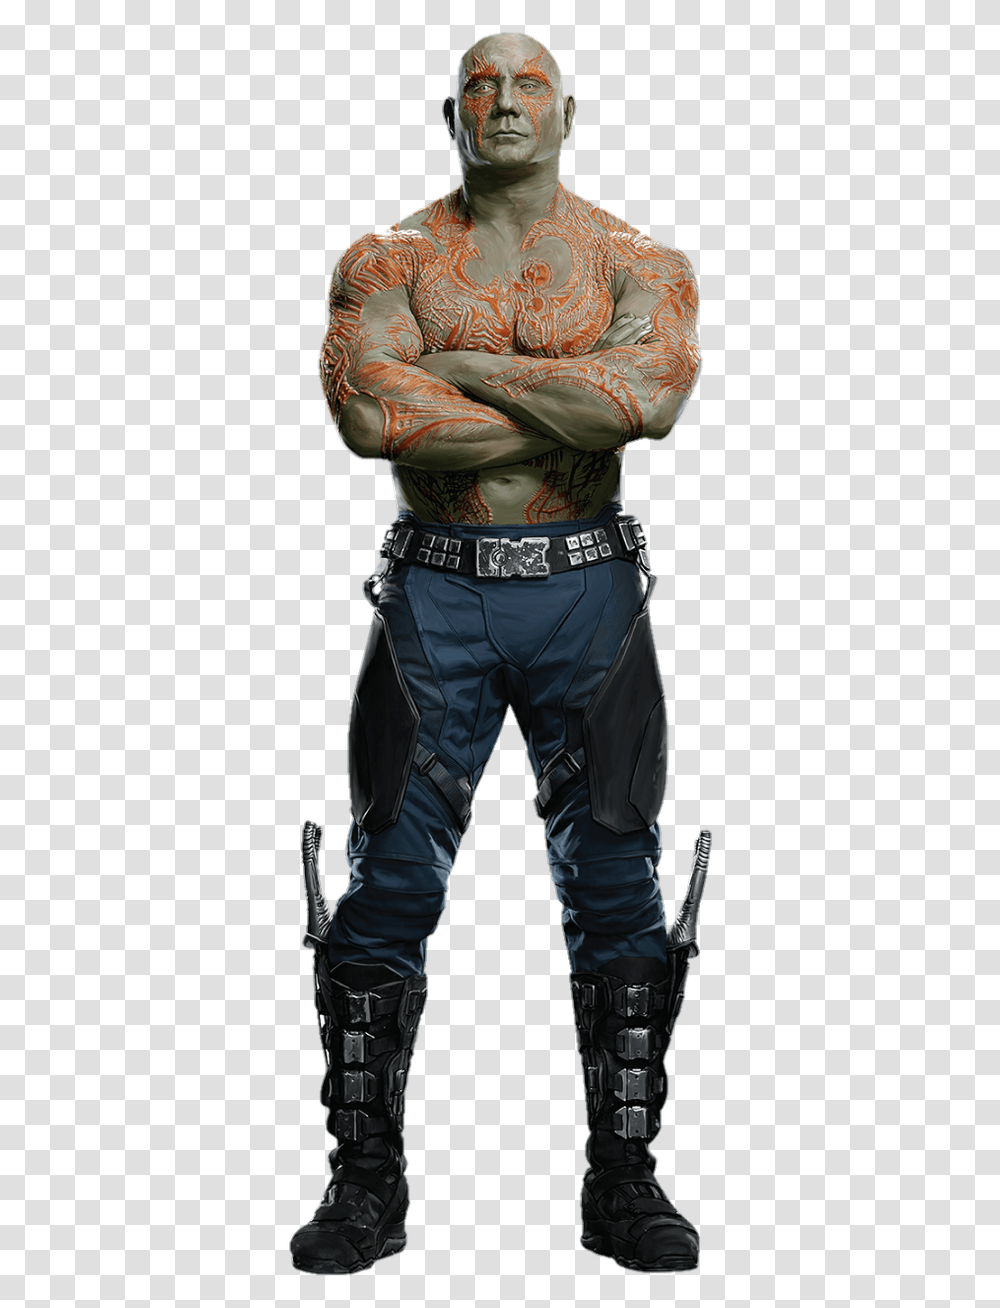 Guardians Of The Galaxy Vol 2 Drax By Metropolis Hero1125 Guardians Of The Galaxy Vol 2 Drax, Person, Ninja, Costume Transparent Png